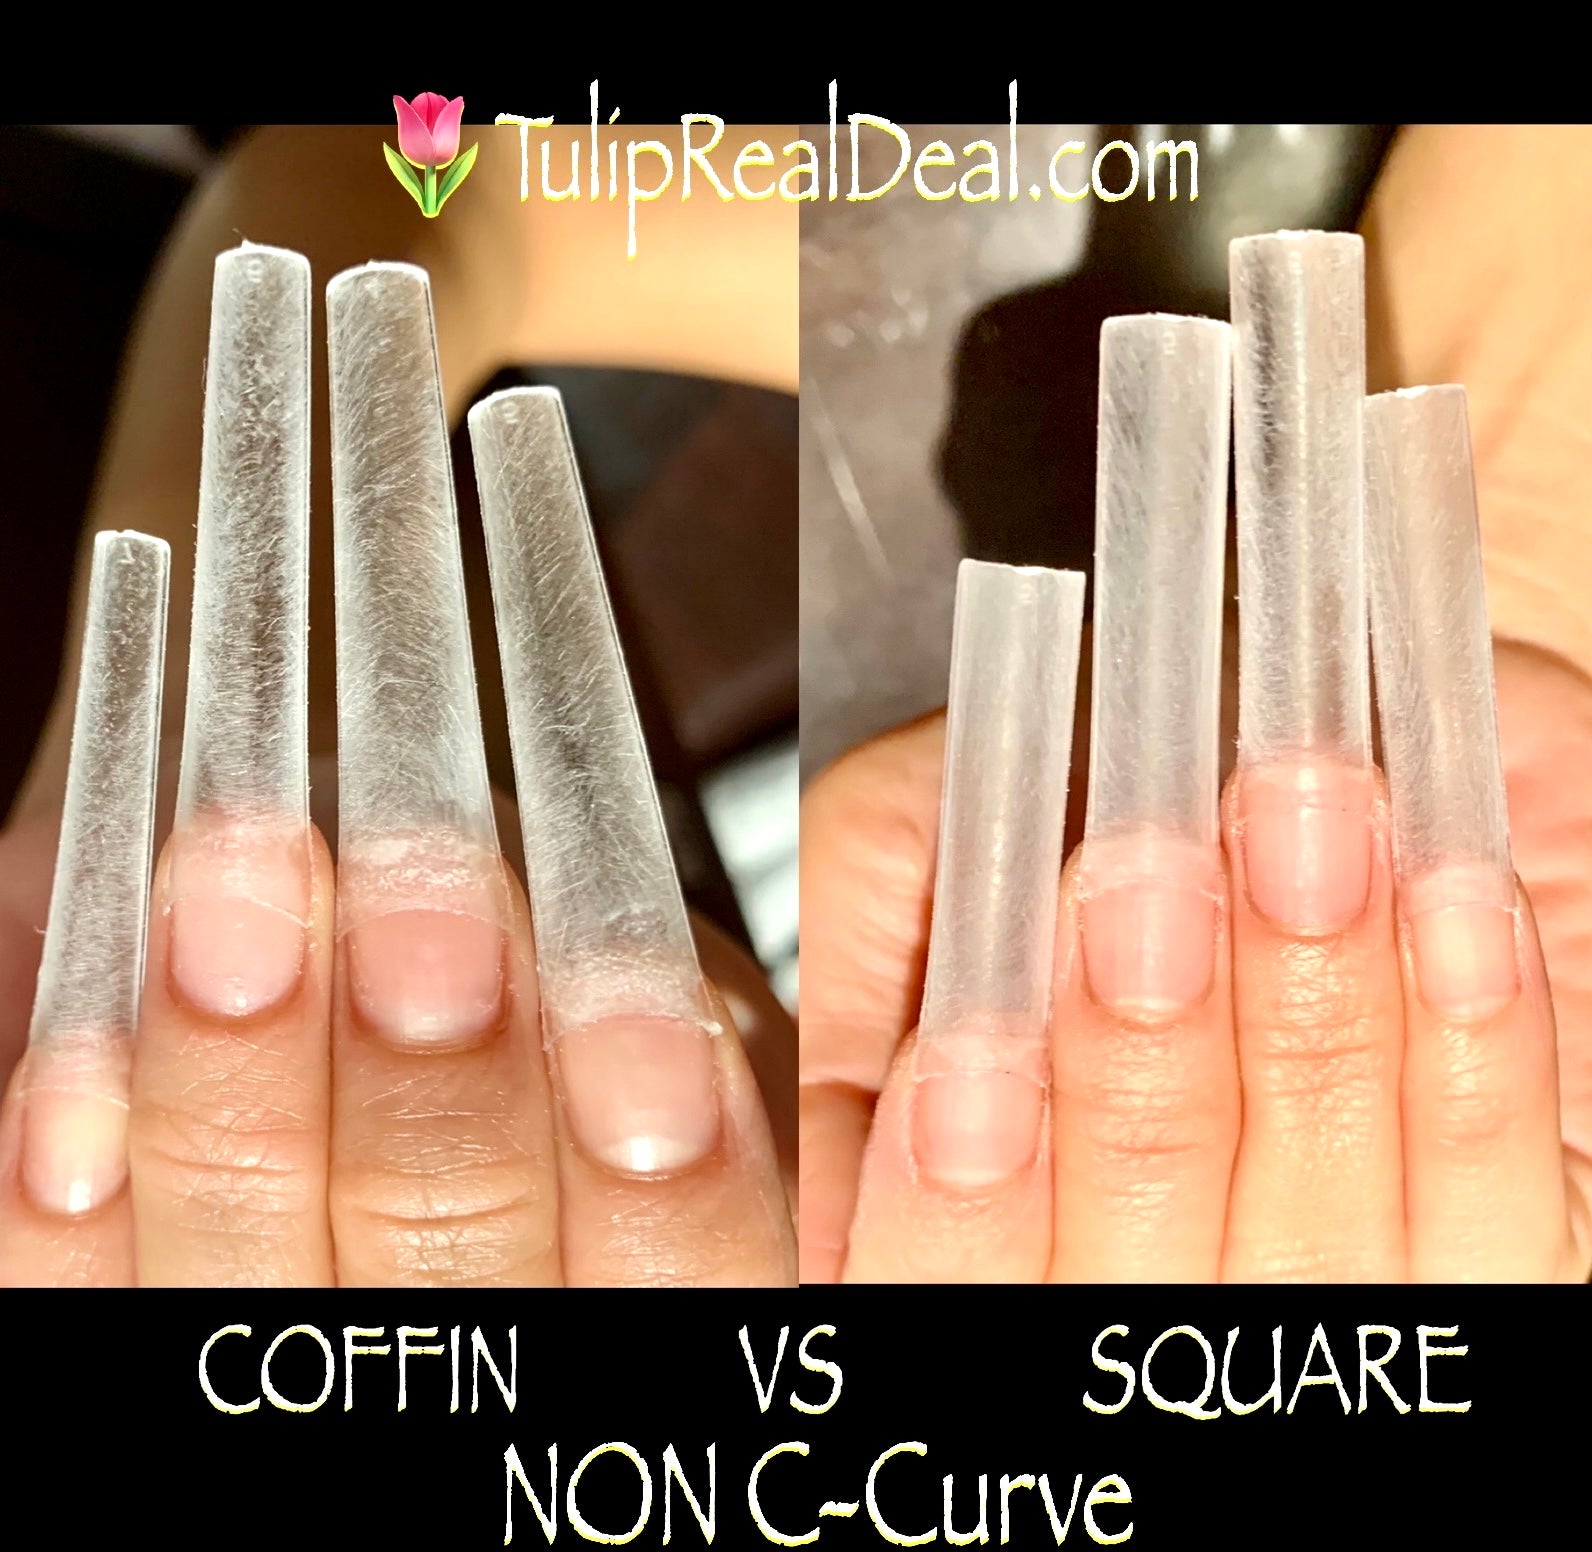 Clear Acrylic Nails Long Square No C Curve Nail Tips With Straight Half  Cover And Clear Manicure Salon Tool From Qinjinqiu, $13.82 | DHgate.Com